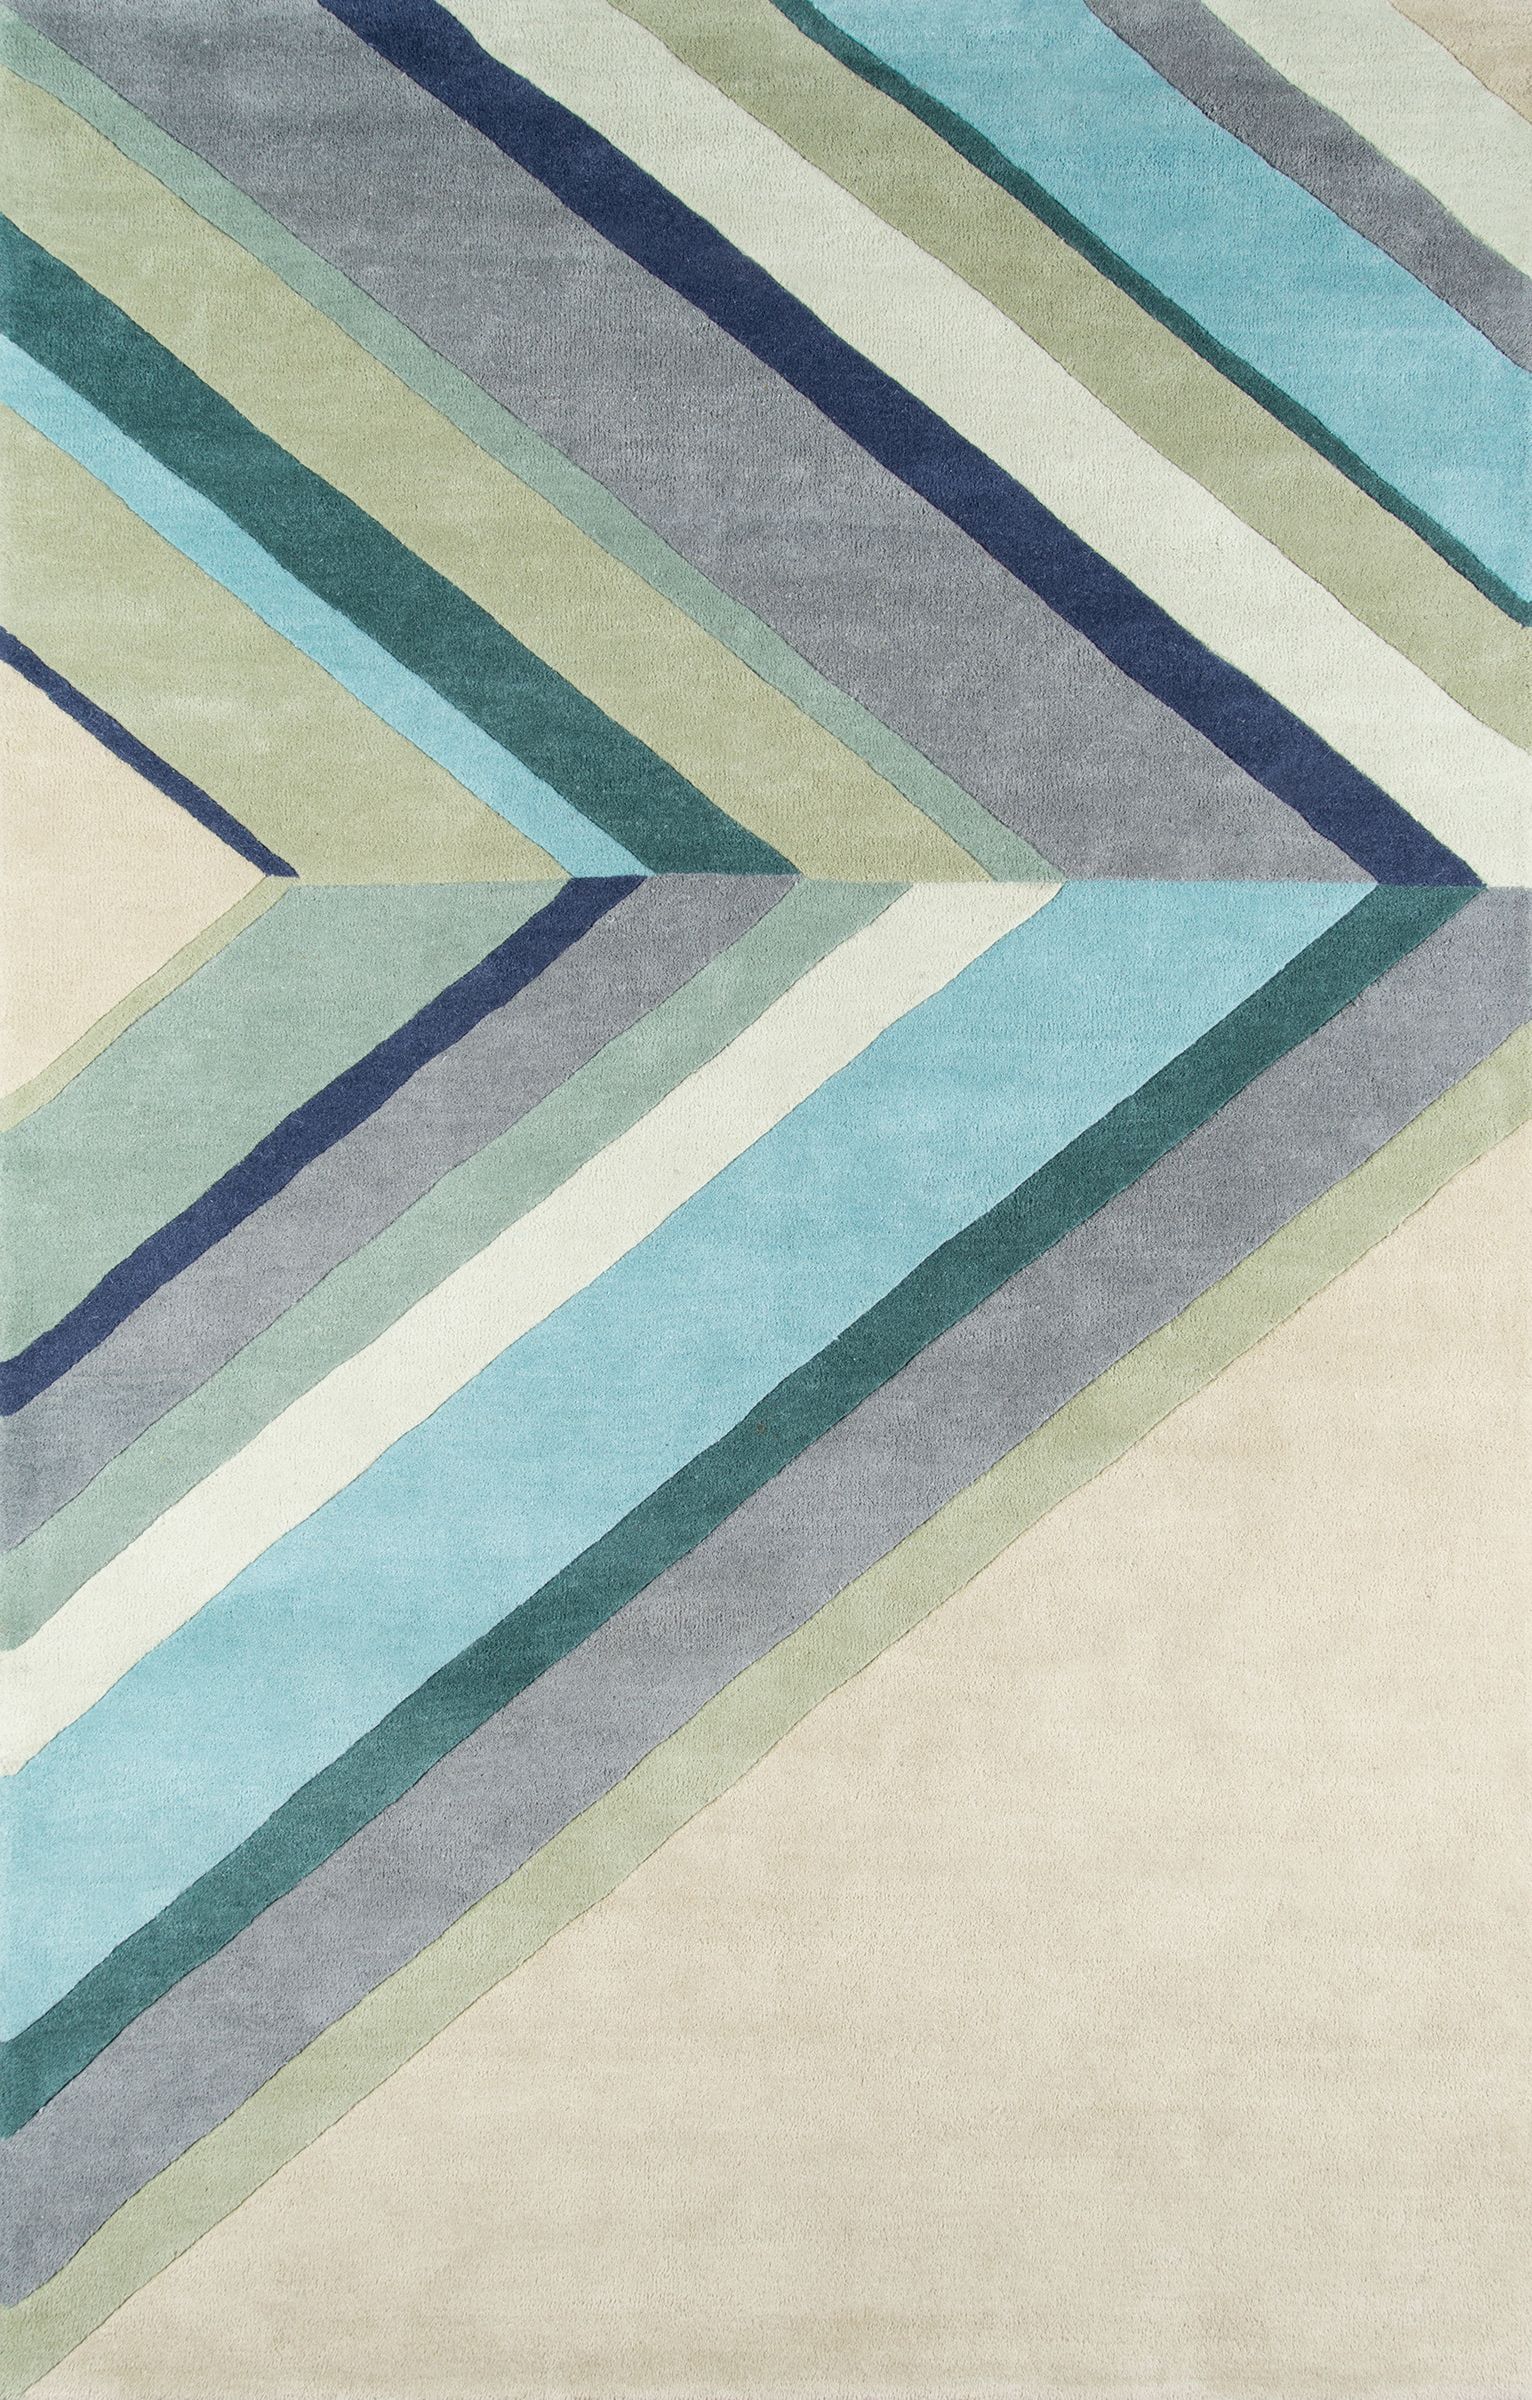 Hand-Tufted Contemporary Striped Blue Wool Area Rug 8' x 10'